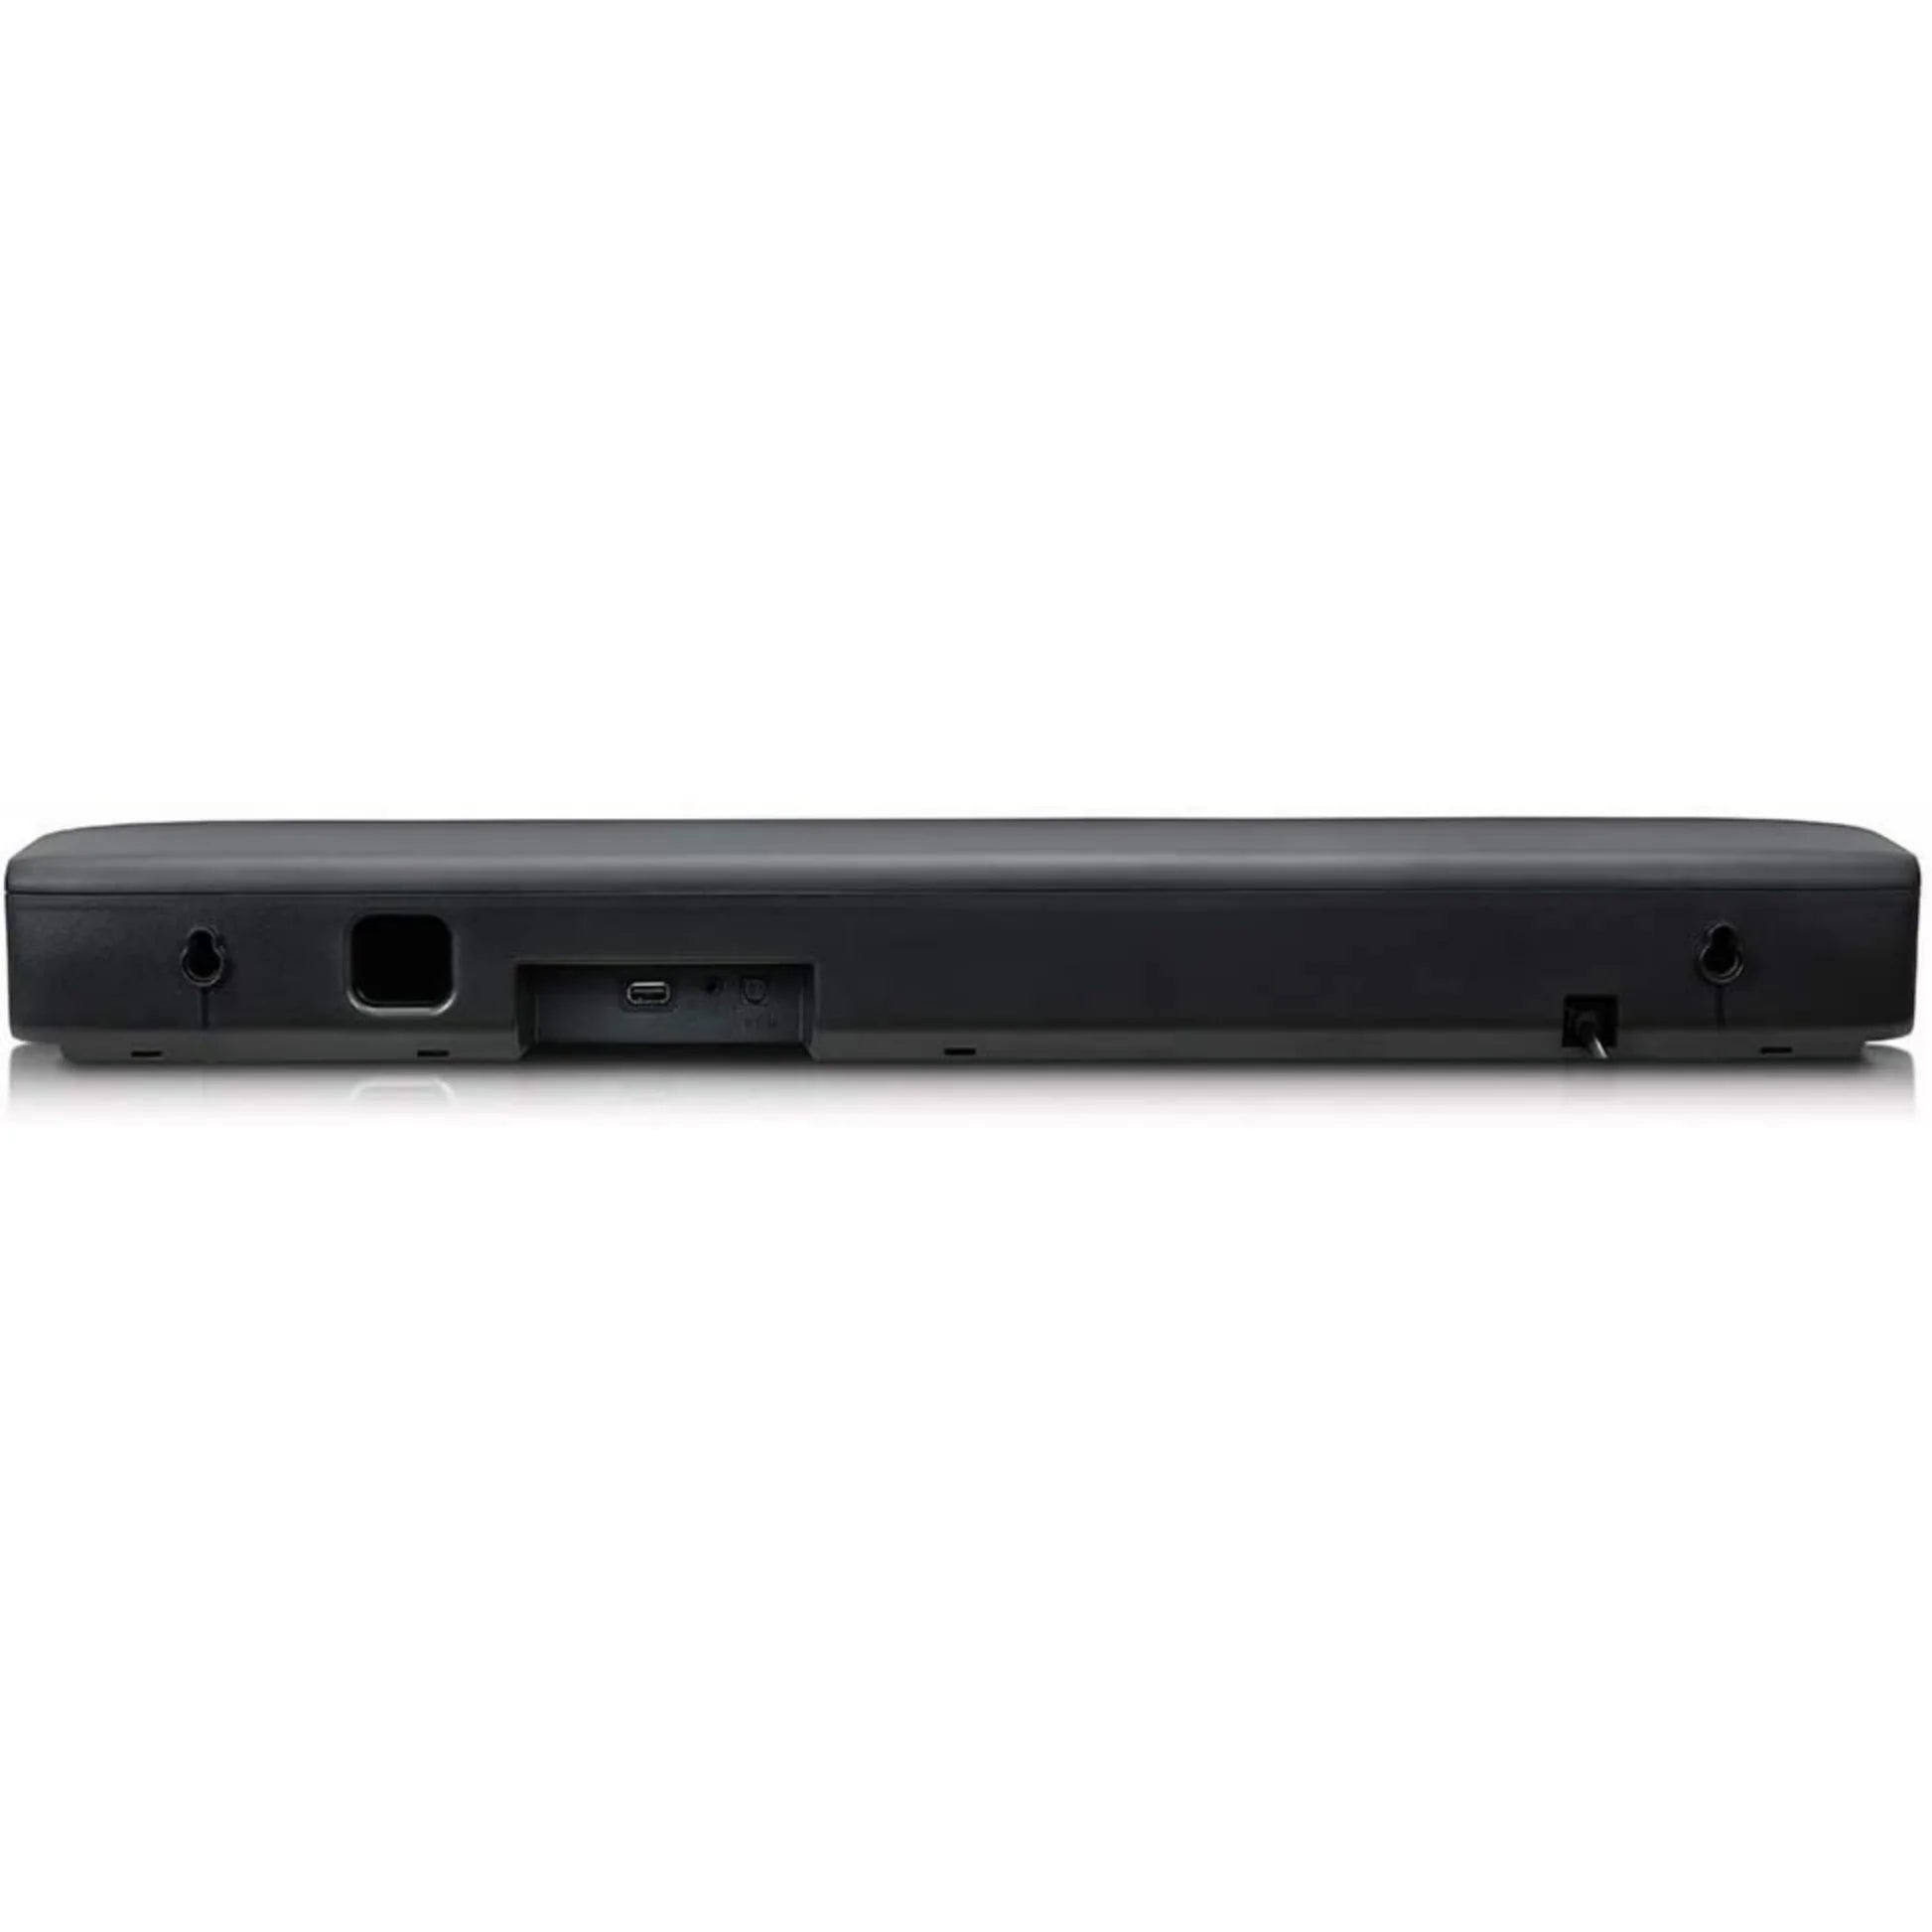 LG 2.0 CHANNEL COMPACT SOUND BAR Model SK1